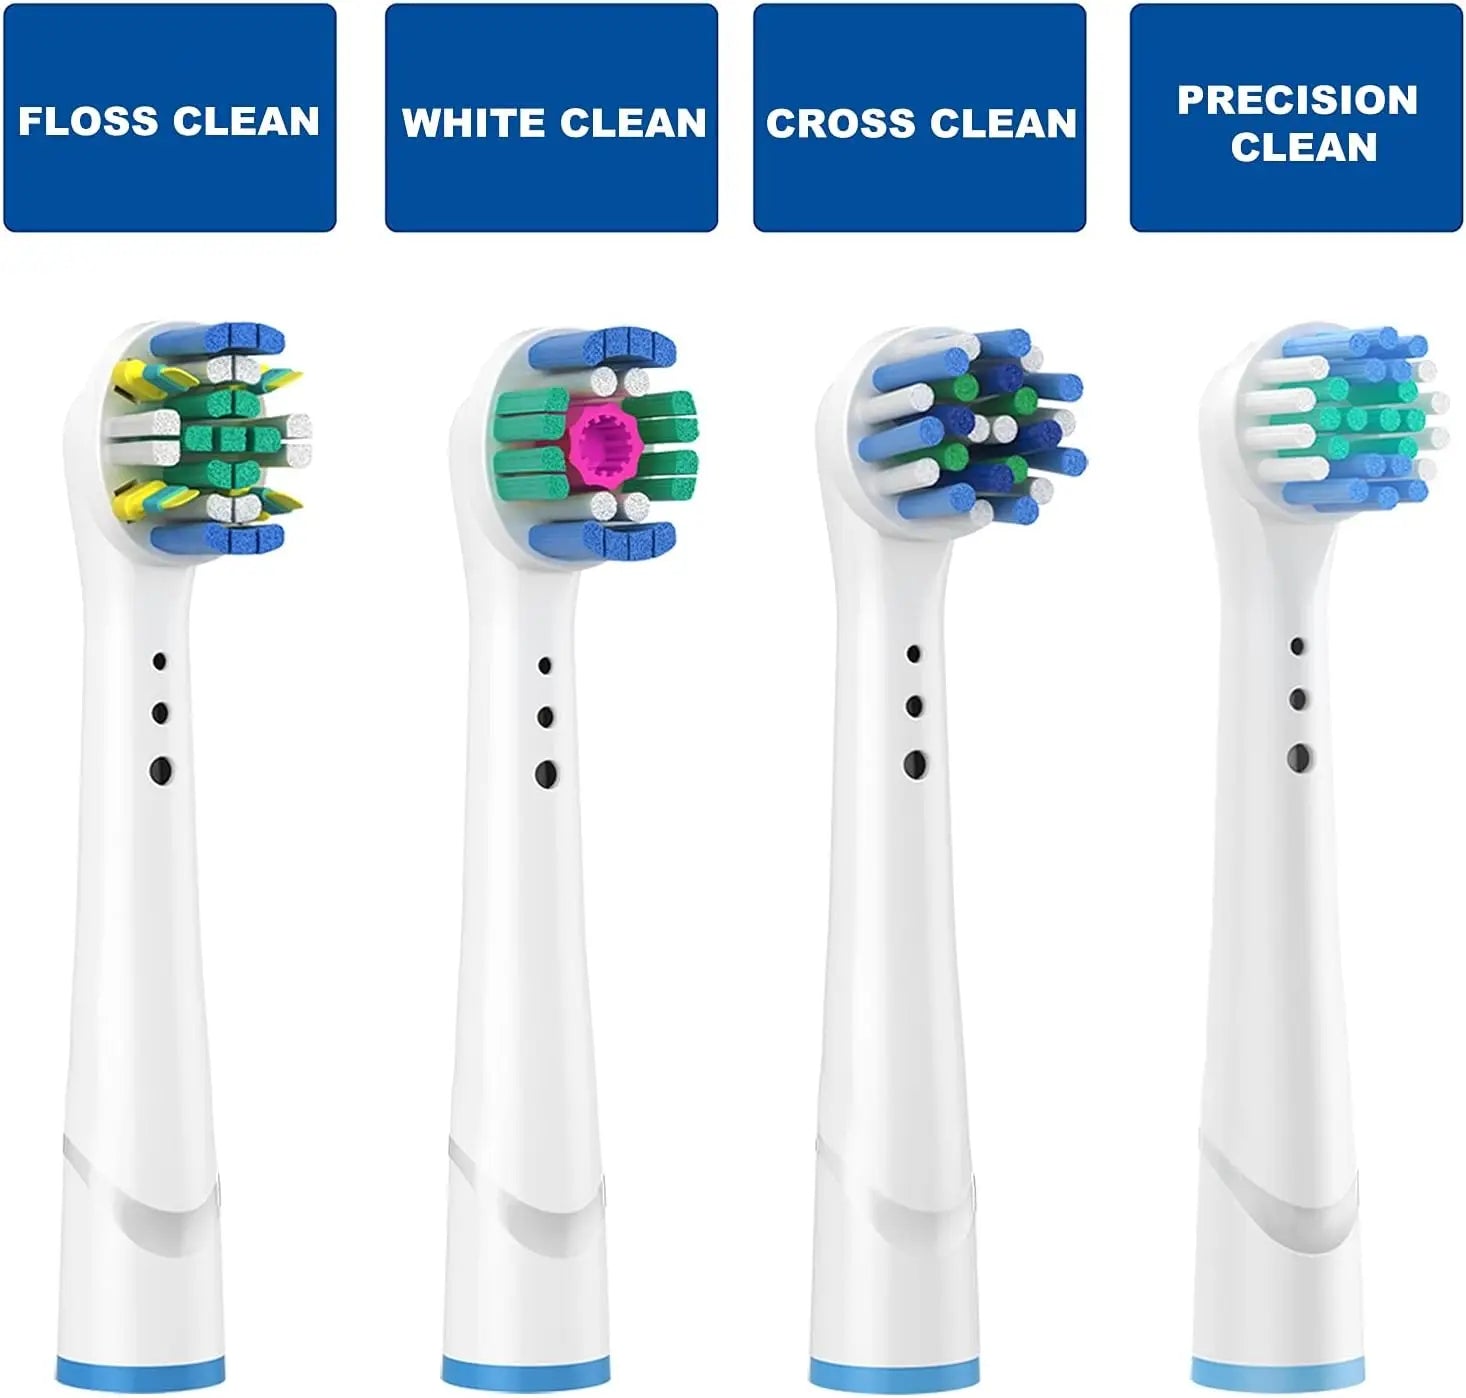 16PCS Replacement Brush Head for OralB Compatible Electric Toothbrush Head Including 4 Precision 4 Floss 4 Cross and 4 Whitening